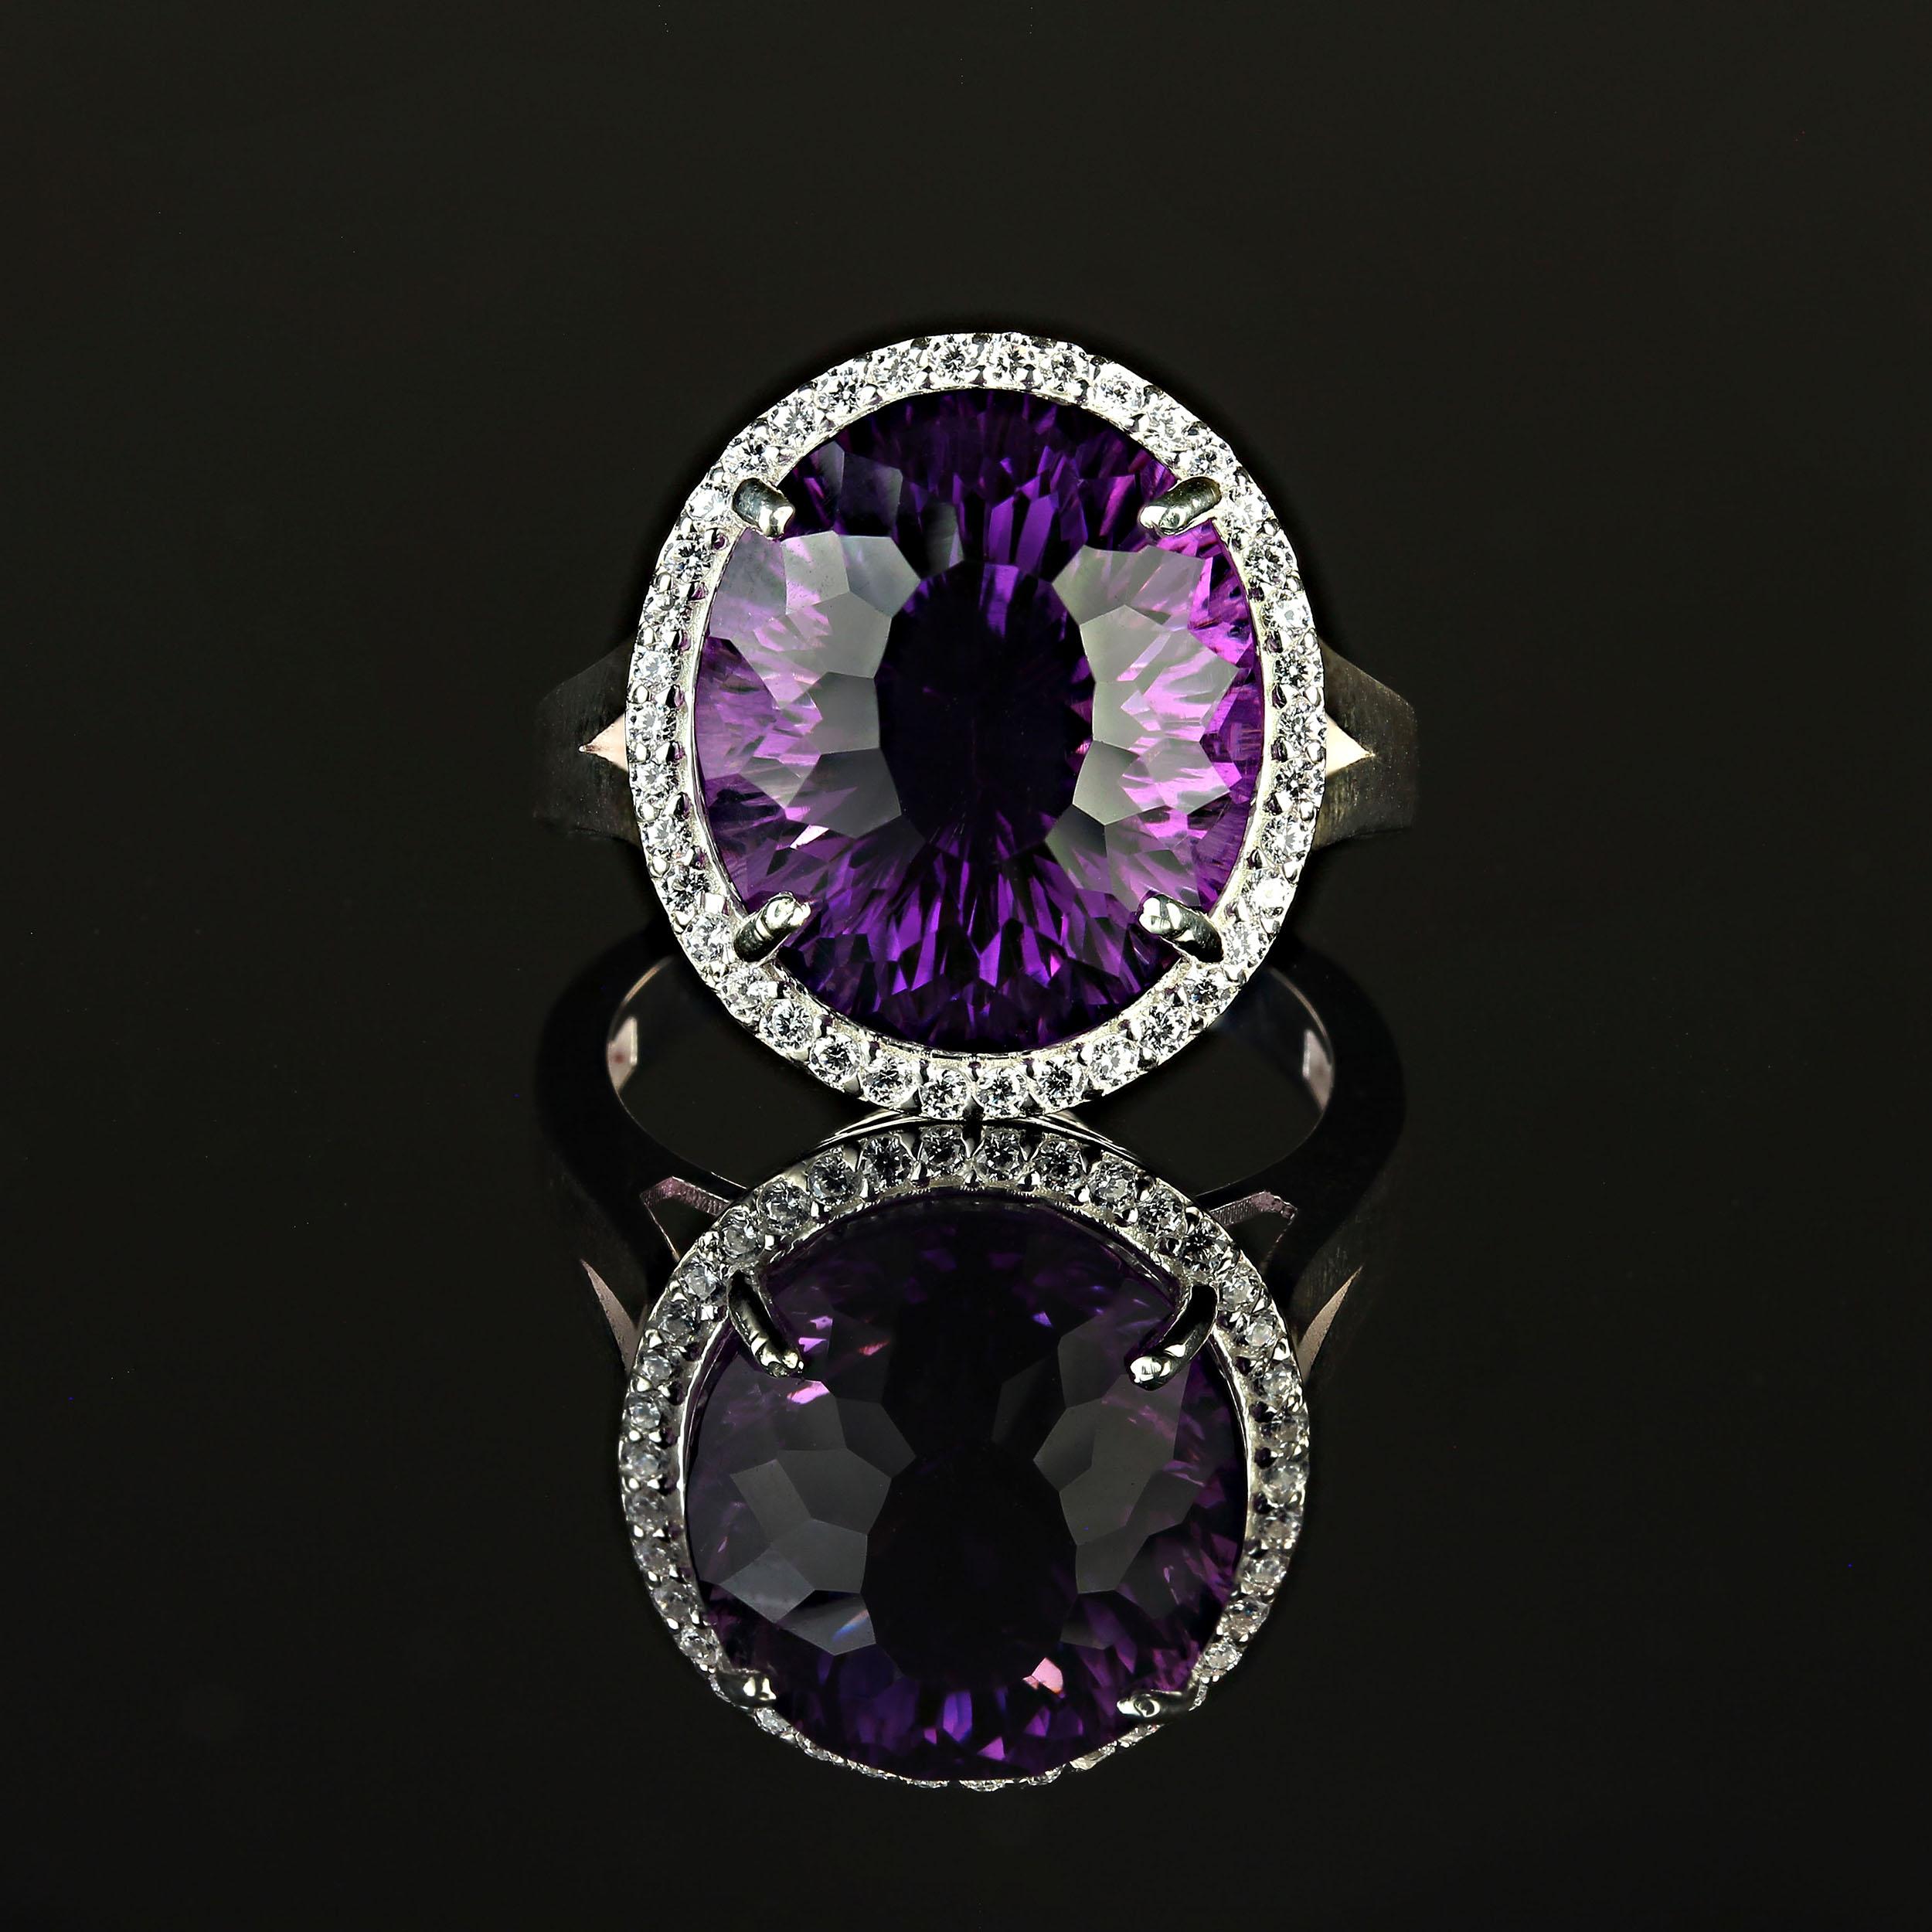 Artisan AJD Elegant Cocktail Ring of Amethyst and Sparkling Zircons February Birthstone! For Sale